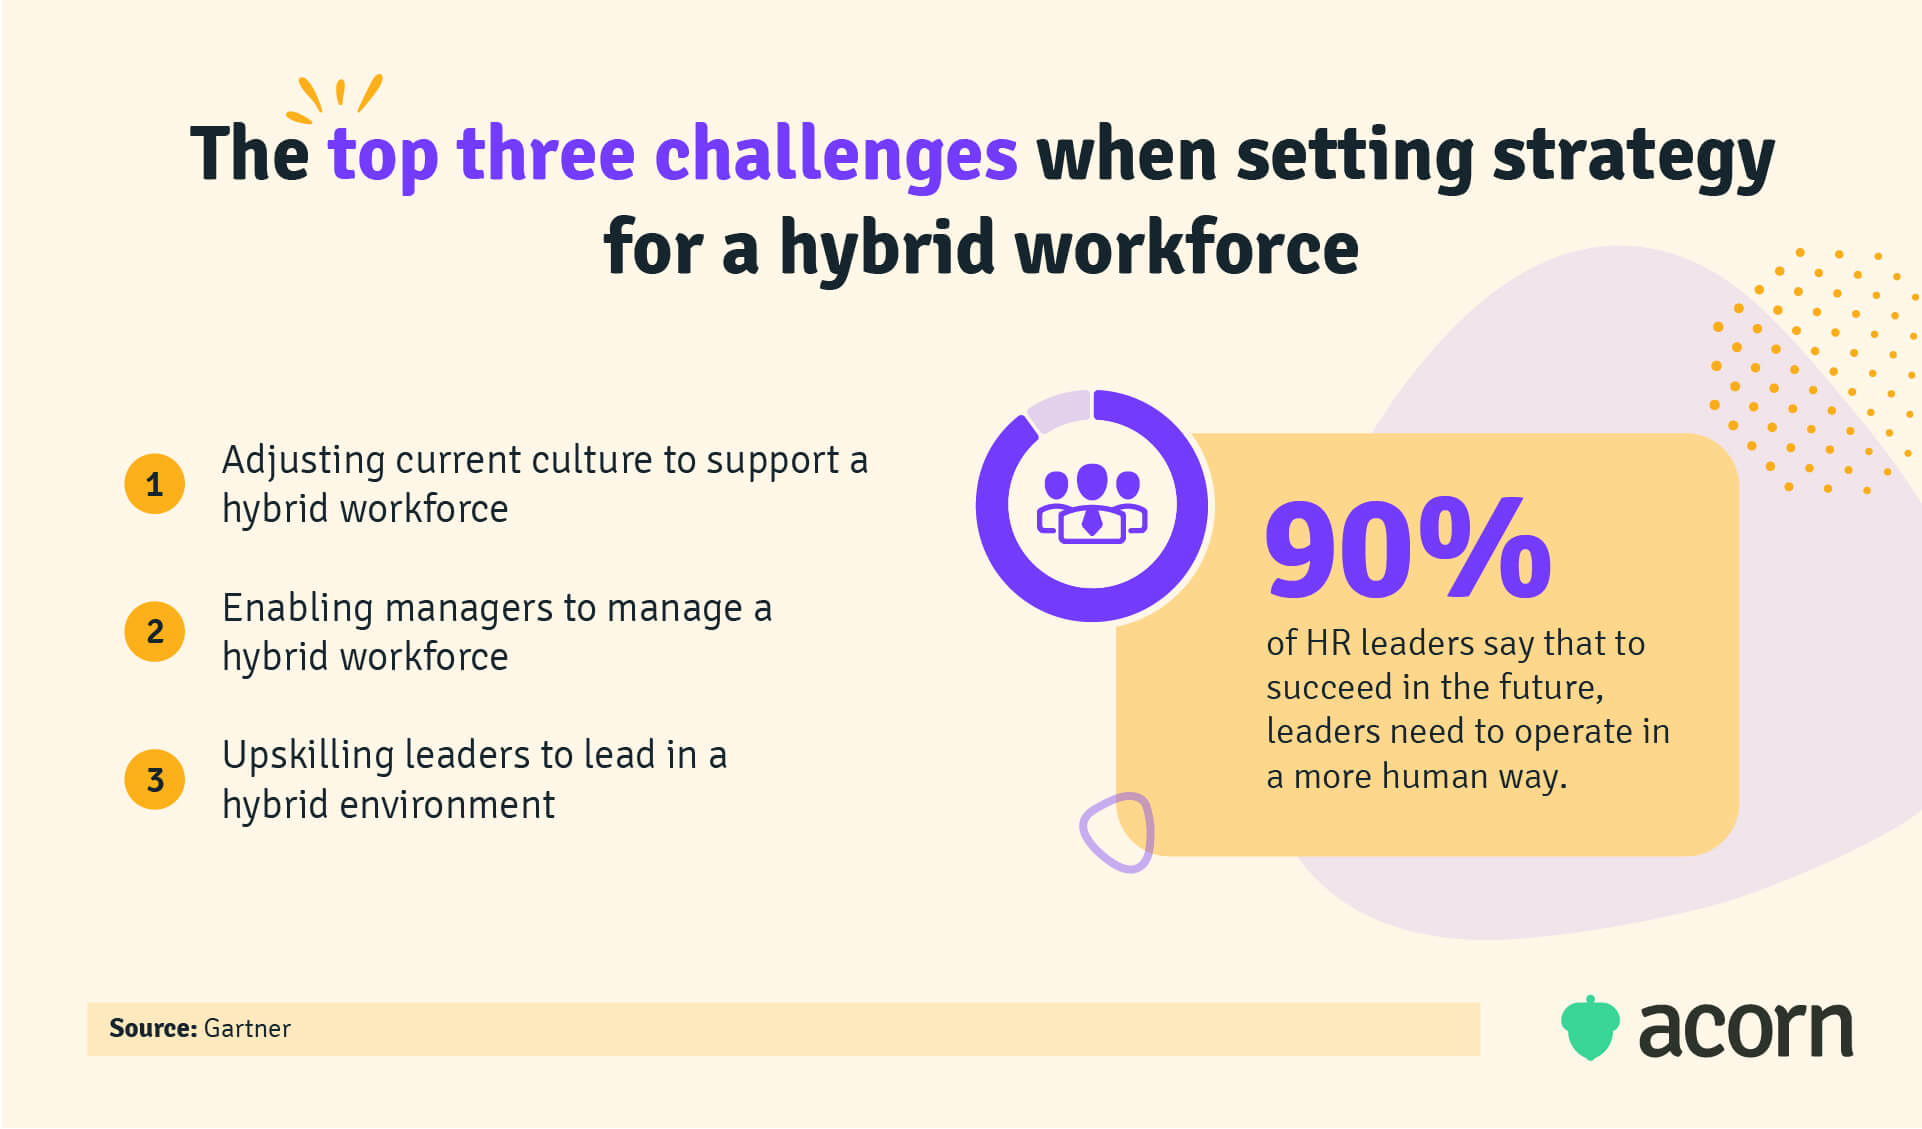 Infographic showing Gartner's top 3 challenges for a hybrid workforce